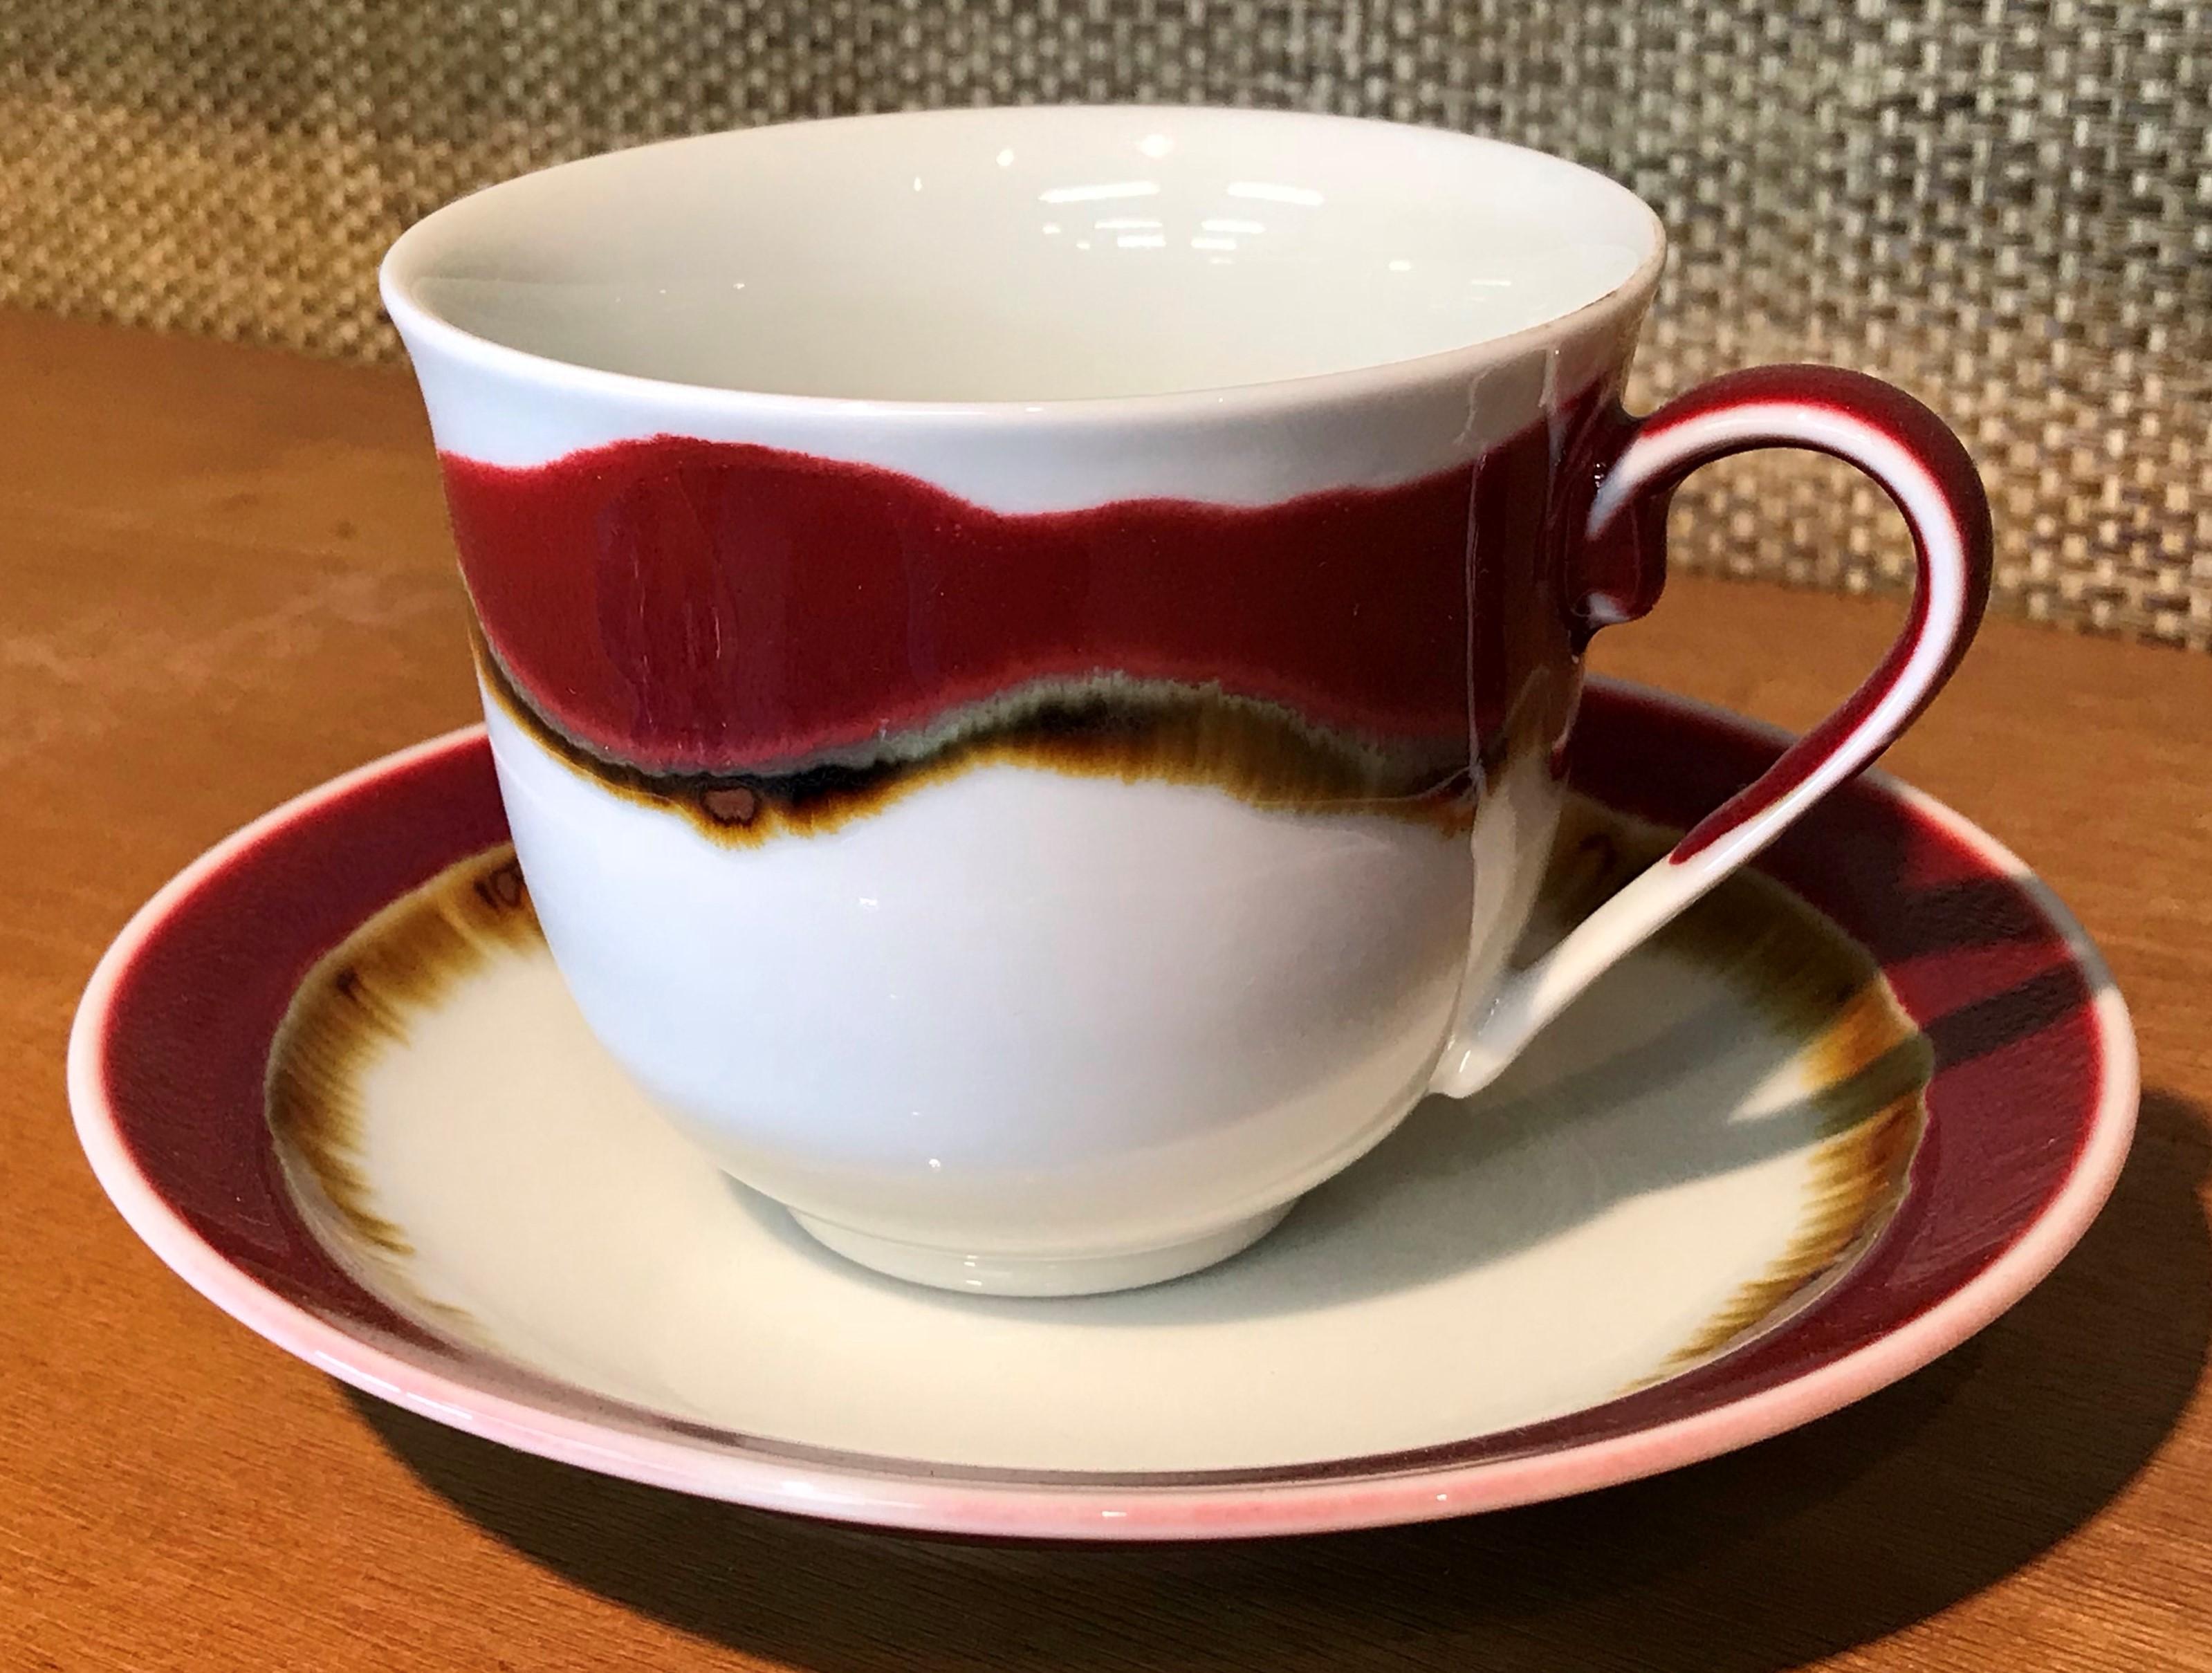 Exceptional Japanese contemporary porcelain cup and saucer, hand-glazed in a striking ruby red and blue on a beautifully shaped body. This is a signed work by a highly acclaimed award-winning master porcelain artist from the Imari-Arita region of